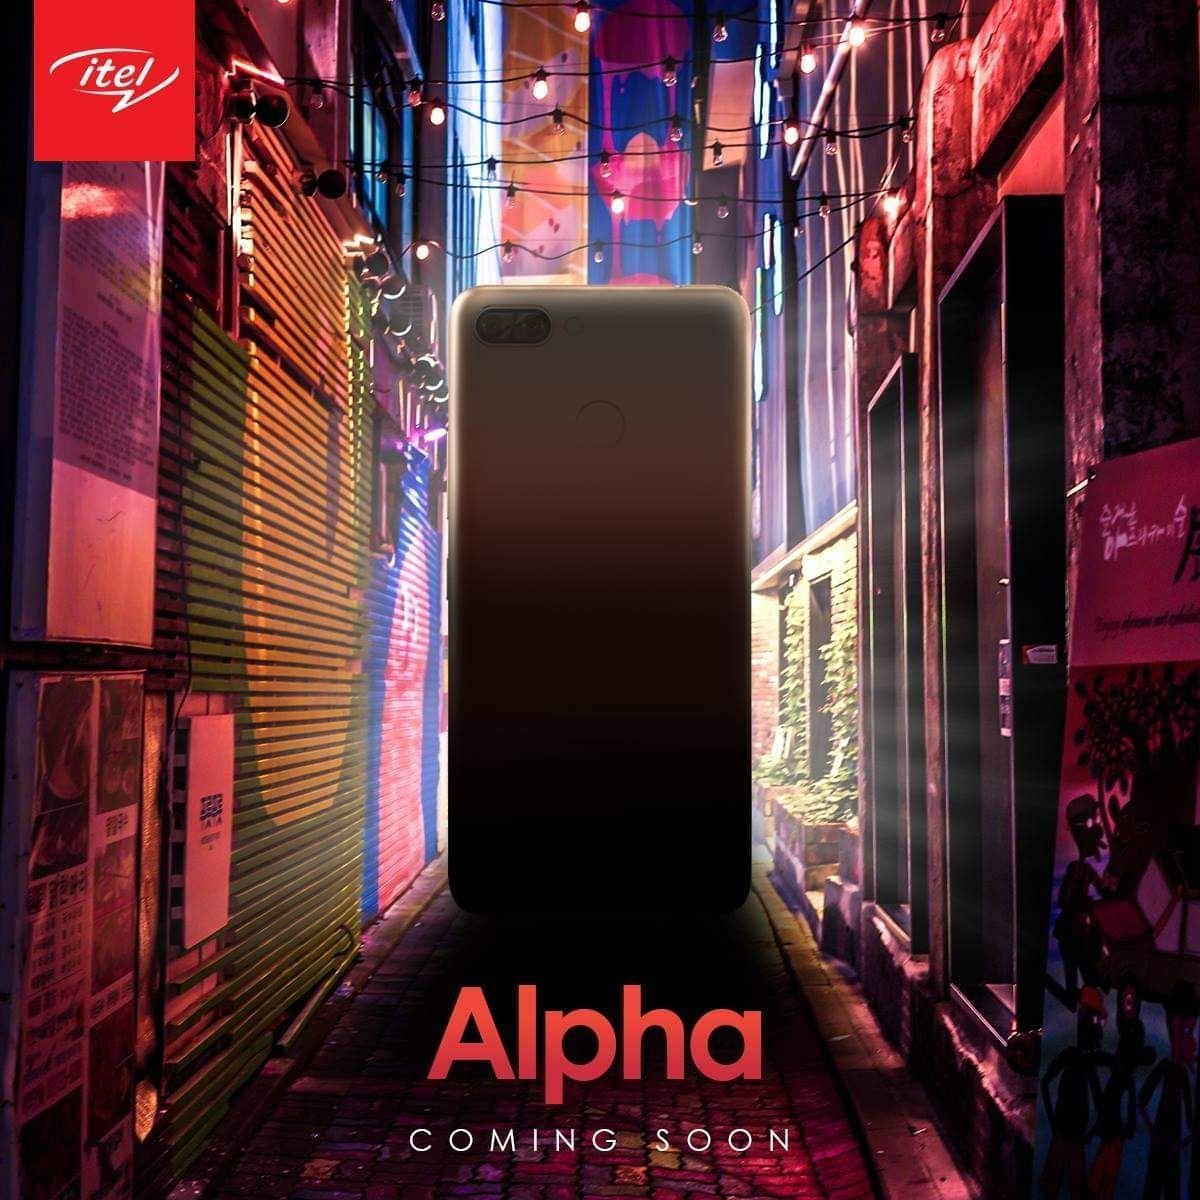 iTel Alpha phone specification and price